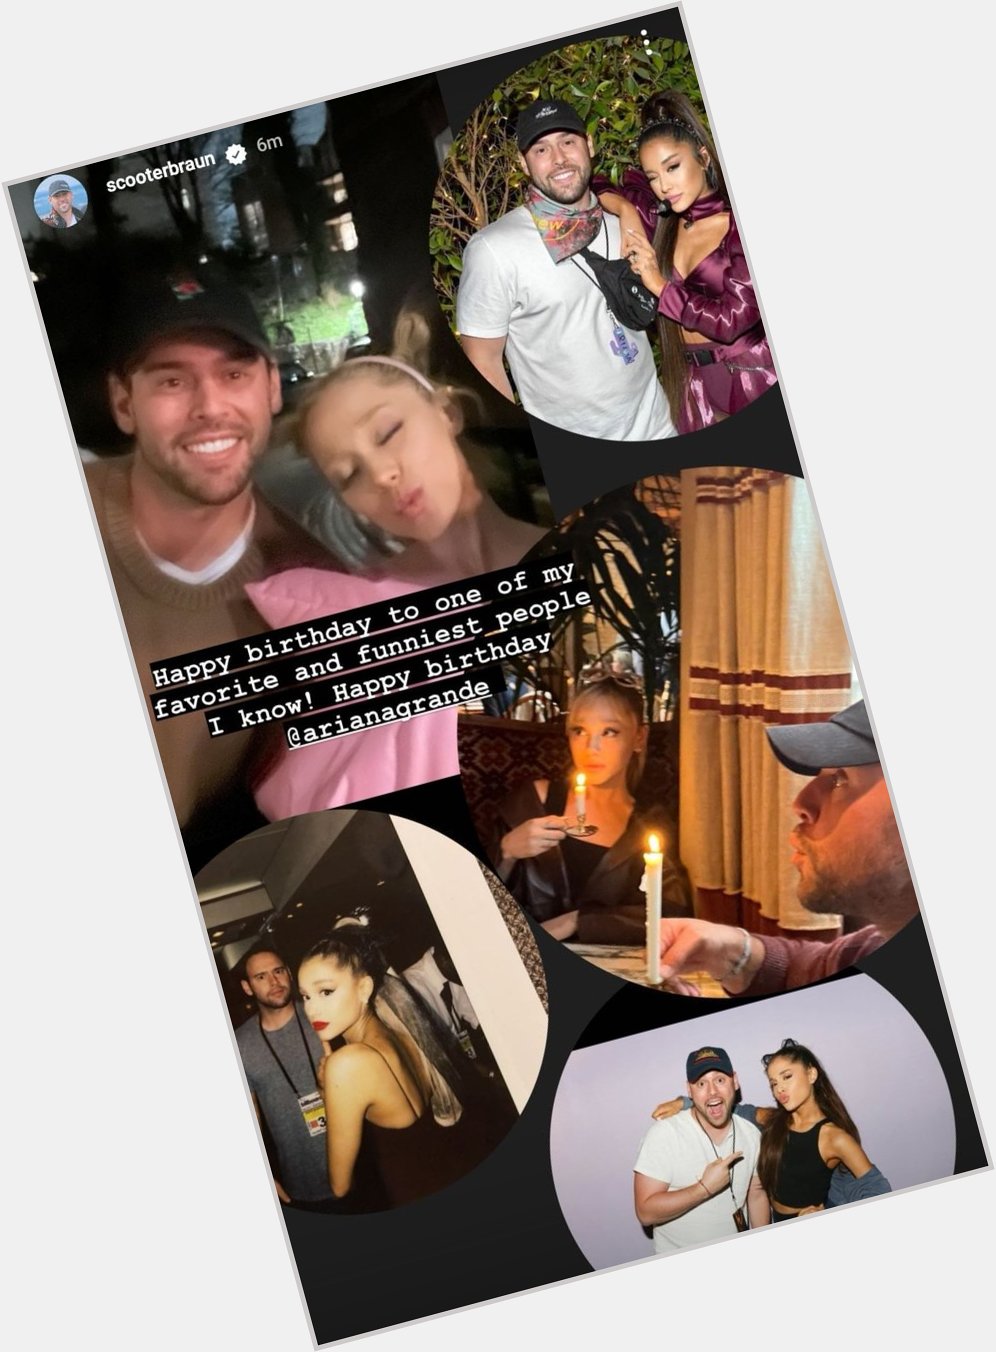 Scooter Braun via Instagram wishing Ariana Grande a happy birthday with 2 new pictures of her! 